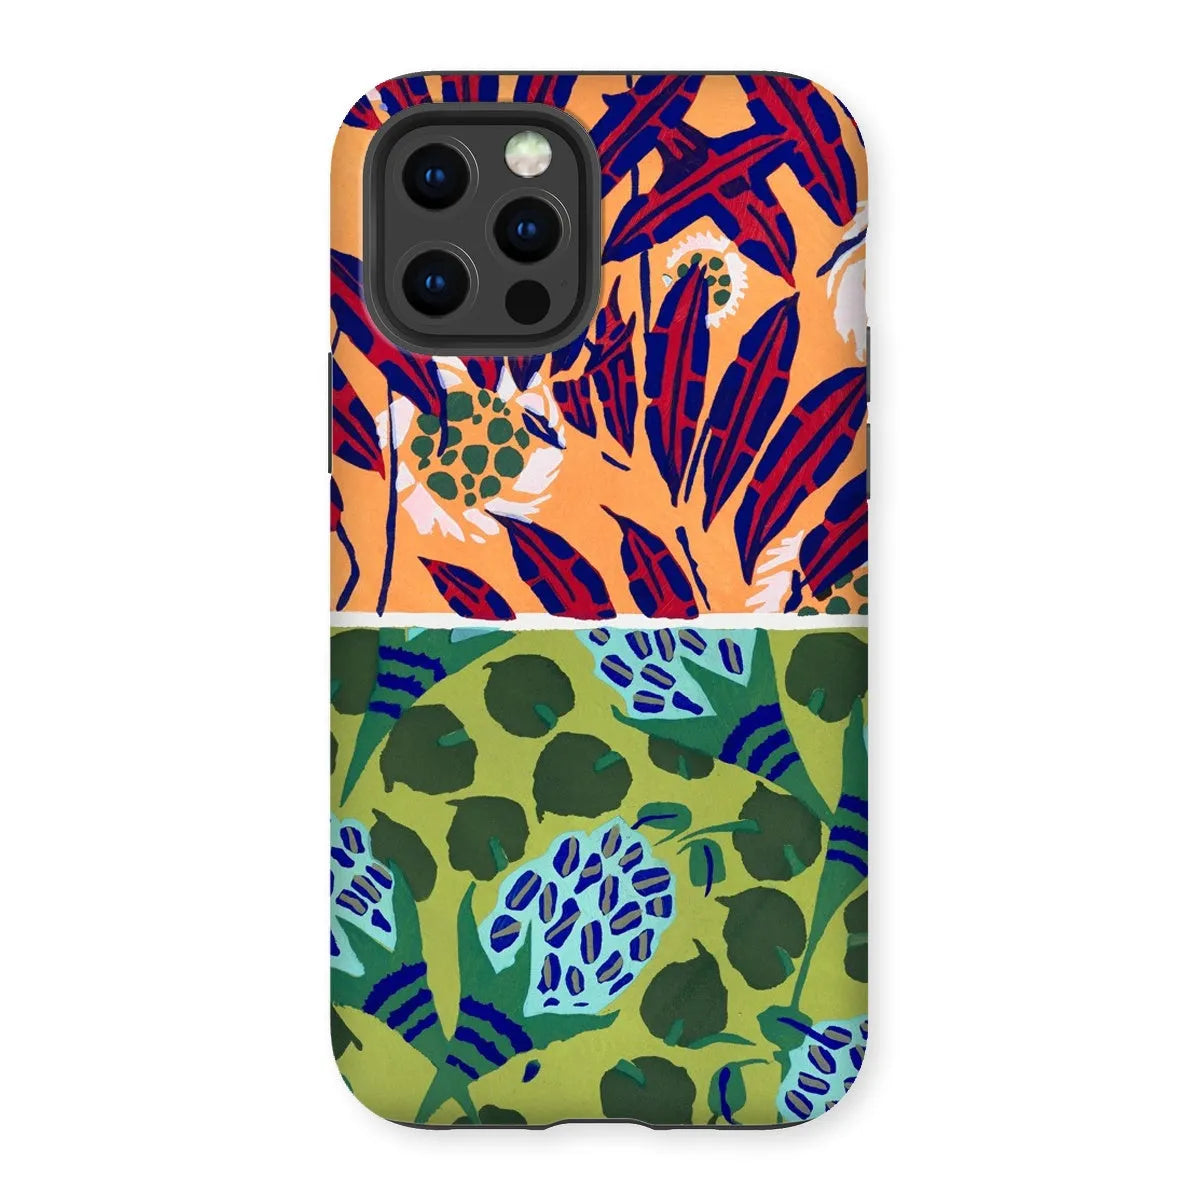 Fabric & Rugs Too - Pochoir Pattern Phone Case - E. A. Séguy - Iphone 12 Pro / Matte - Mobile Phone Cases - Aesthetic